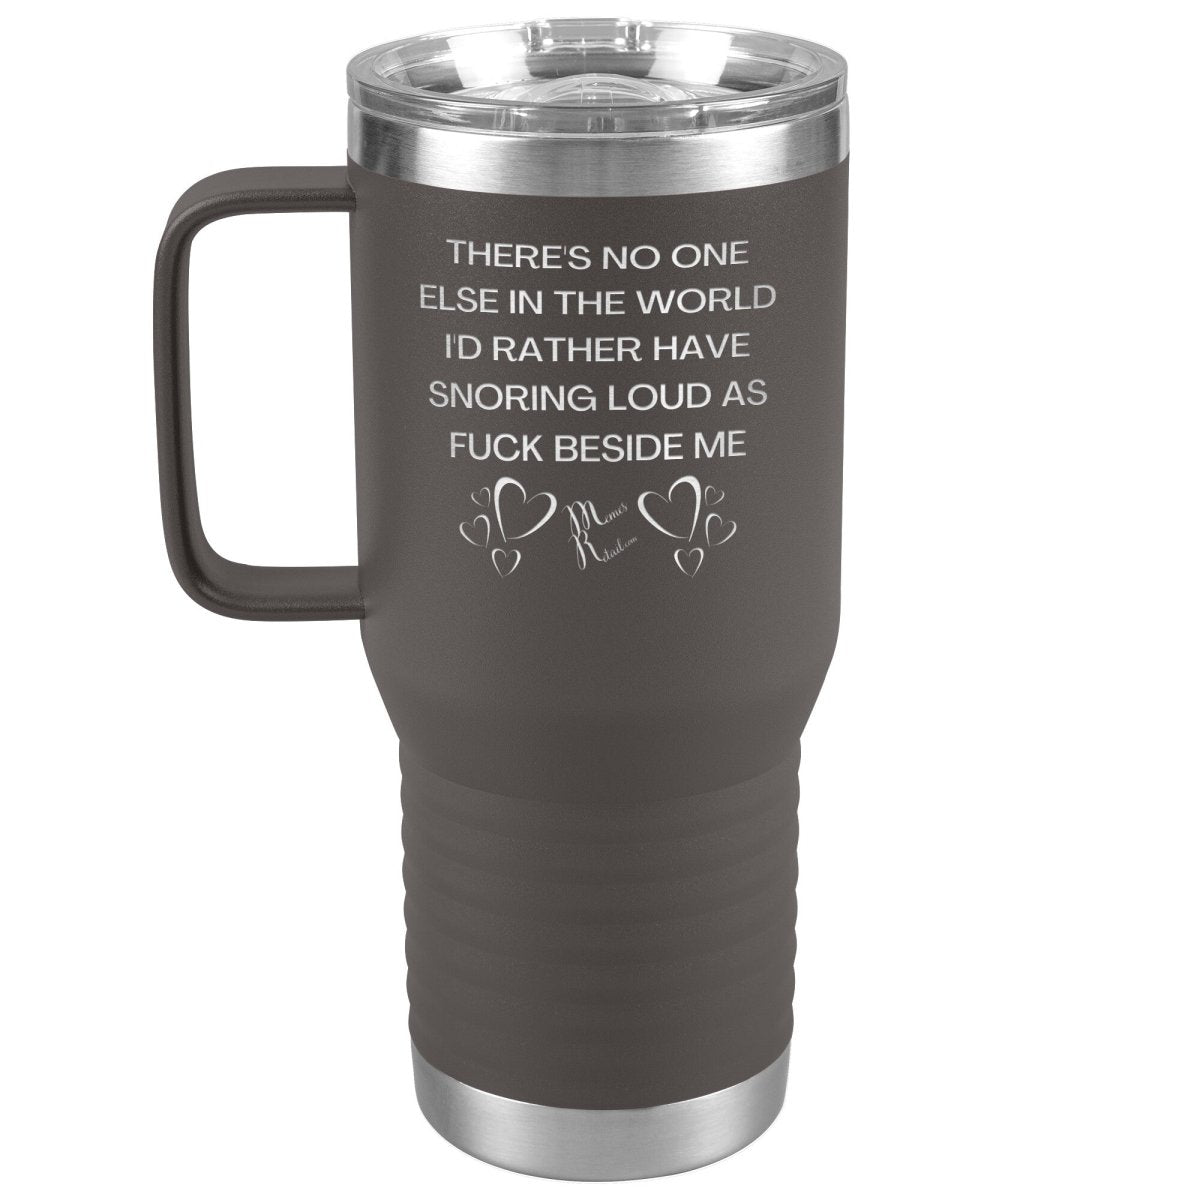 There's No One Else in the World I'd Rather Have Snoring Loud, 20oz Travel Tumbler / Pewter - MemesRetail.com